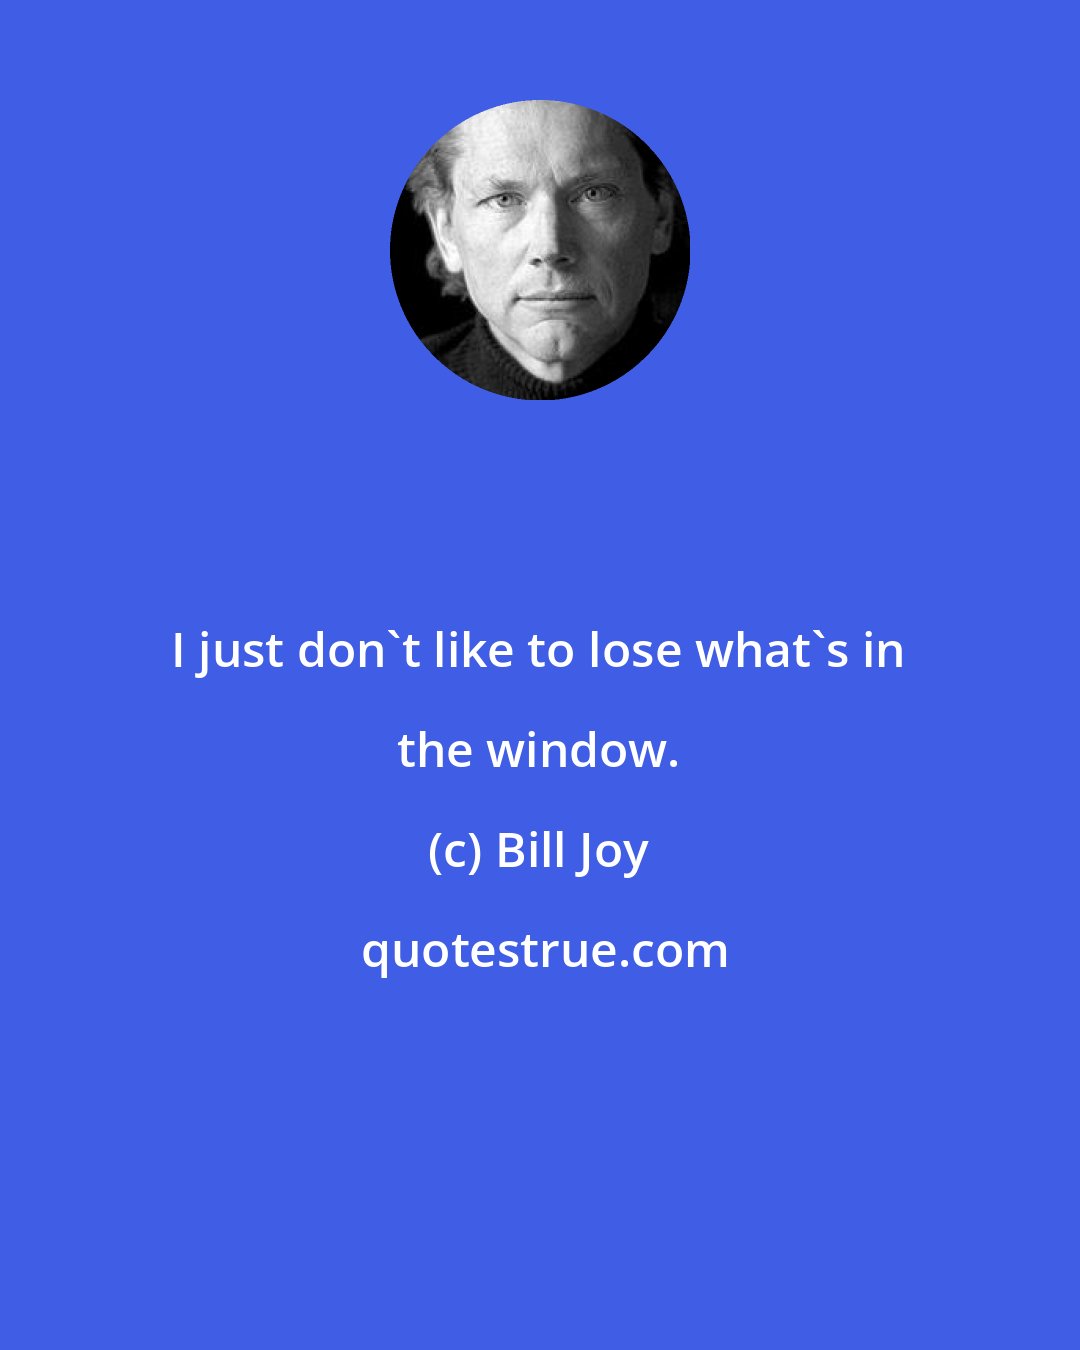 Bill Joy: I just don't like to lose what's in the window.